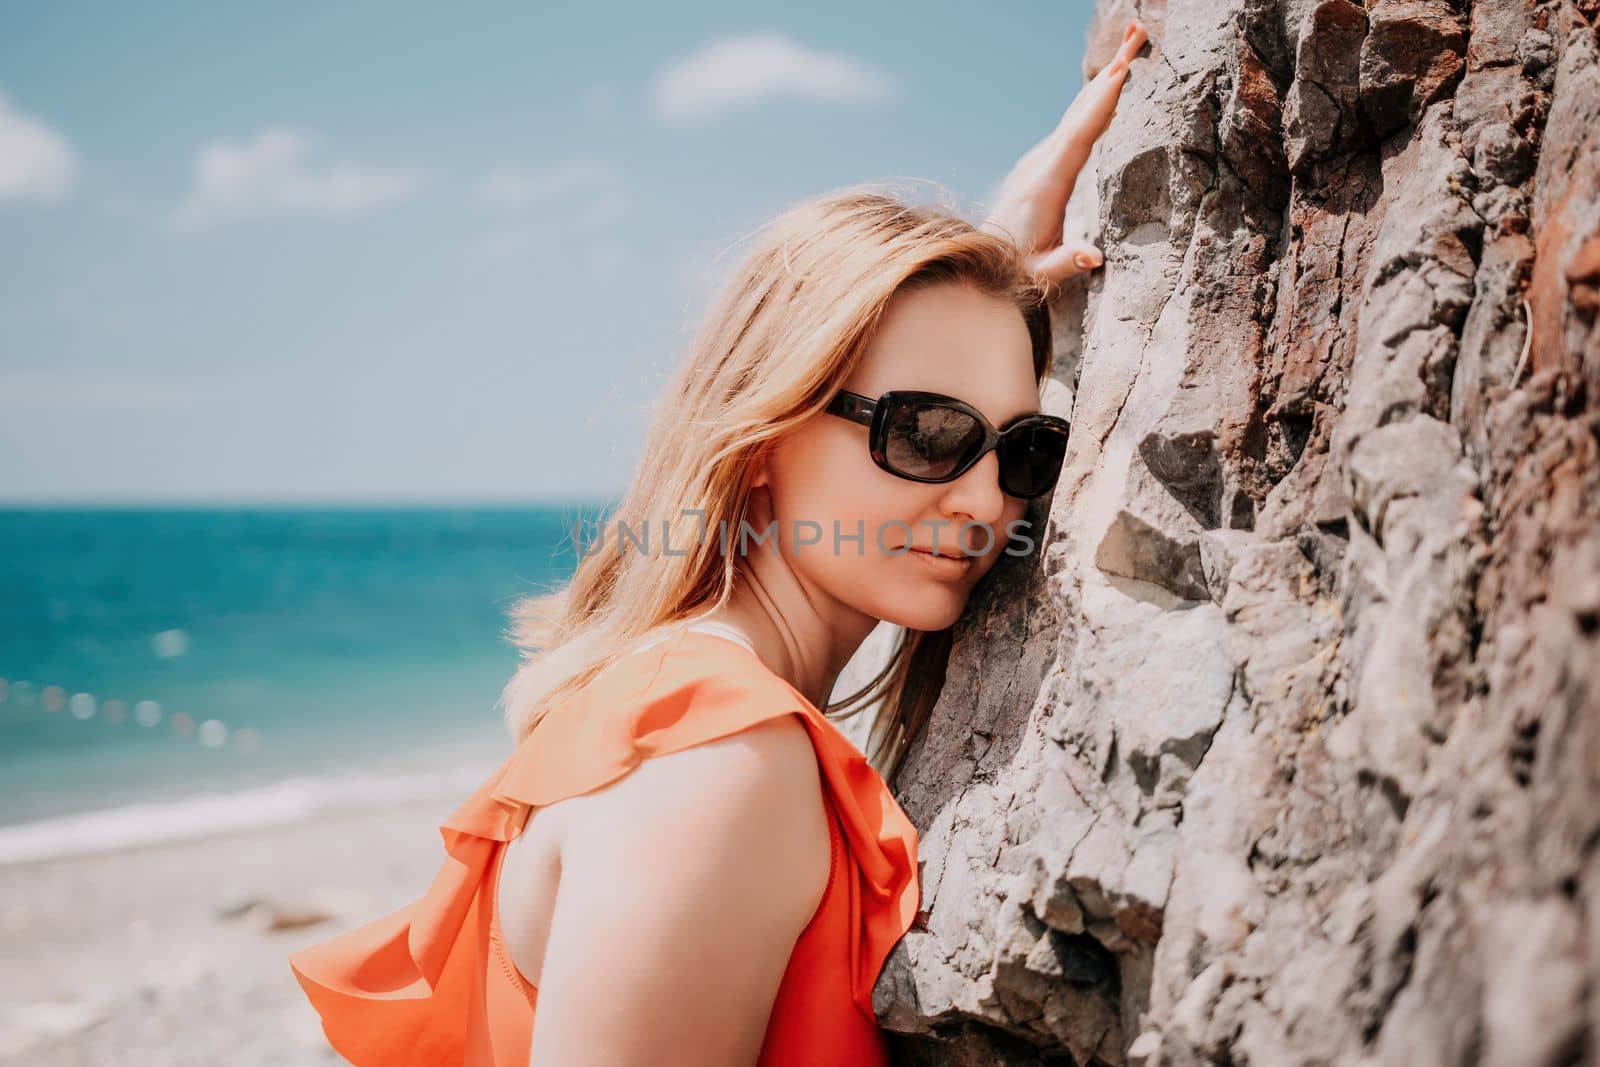 Young woman in red bikini on Beach. Blonde in sunglasses on pebble beach enjoying sun. Happy lady in one piece red swimsuit relaxing and sunbathing by turquoise sea ocean on hot summer day. Close up by panophotograph